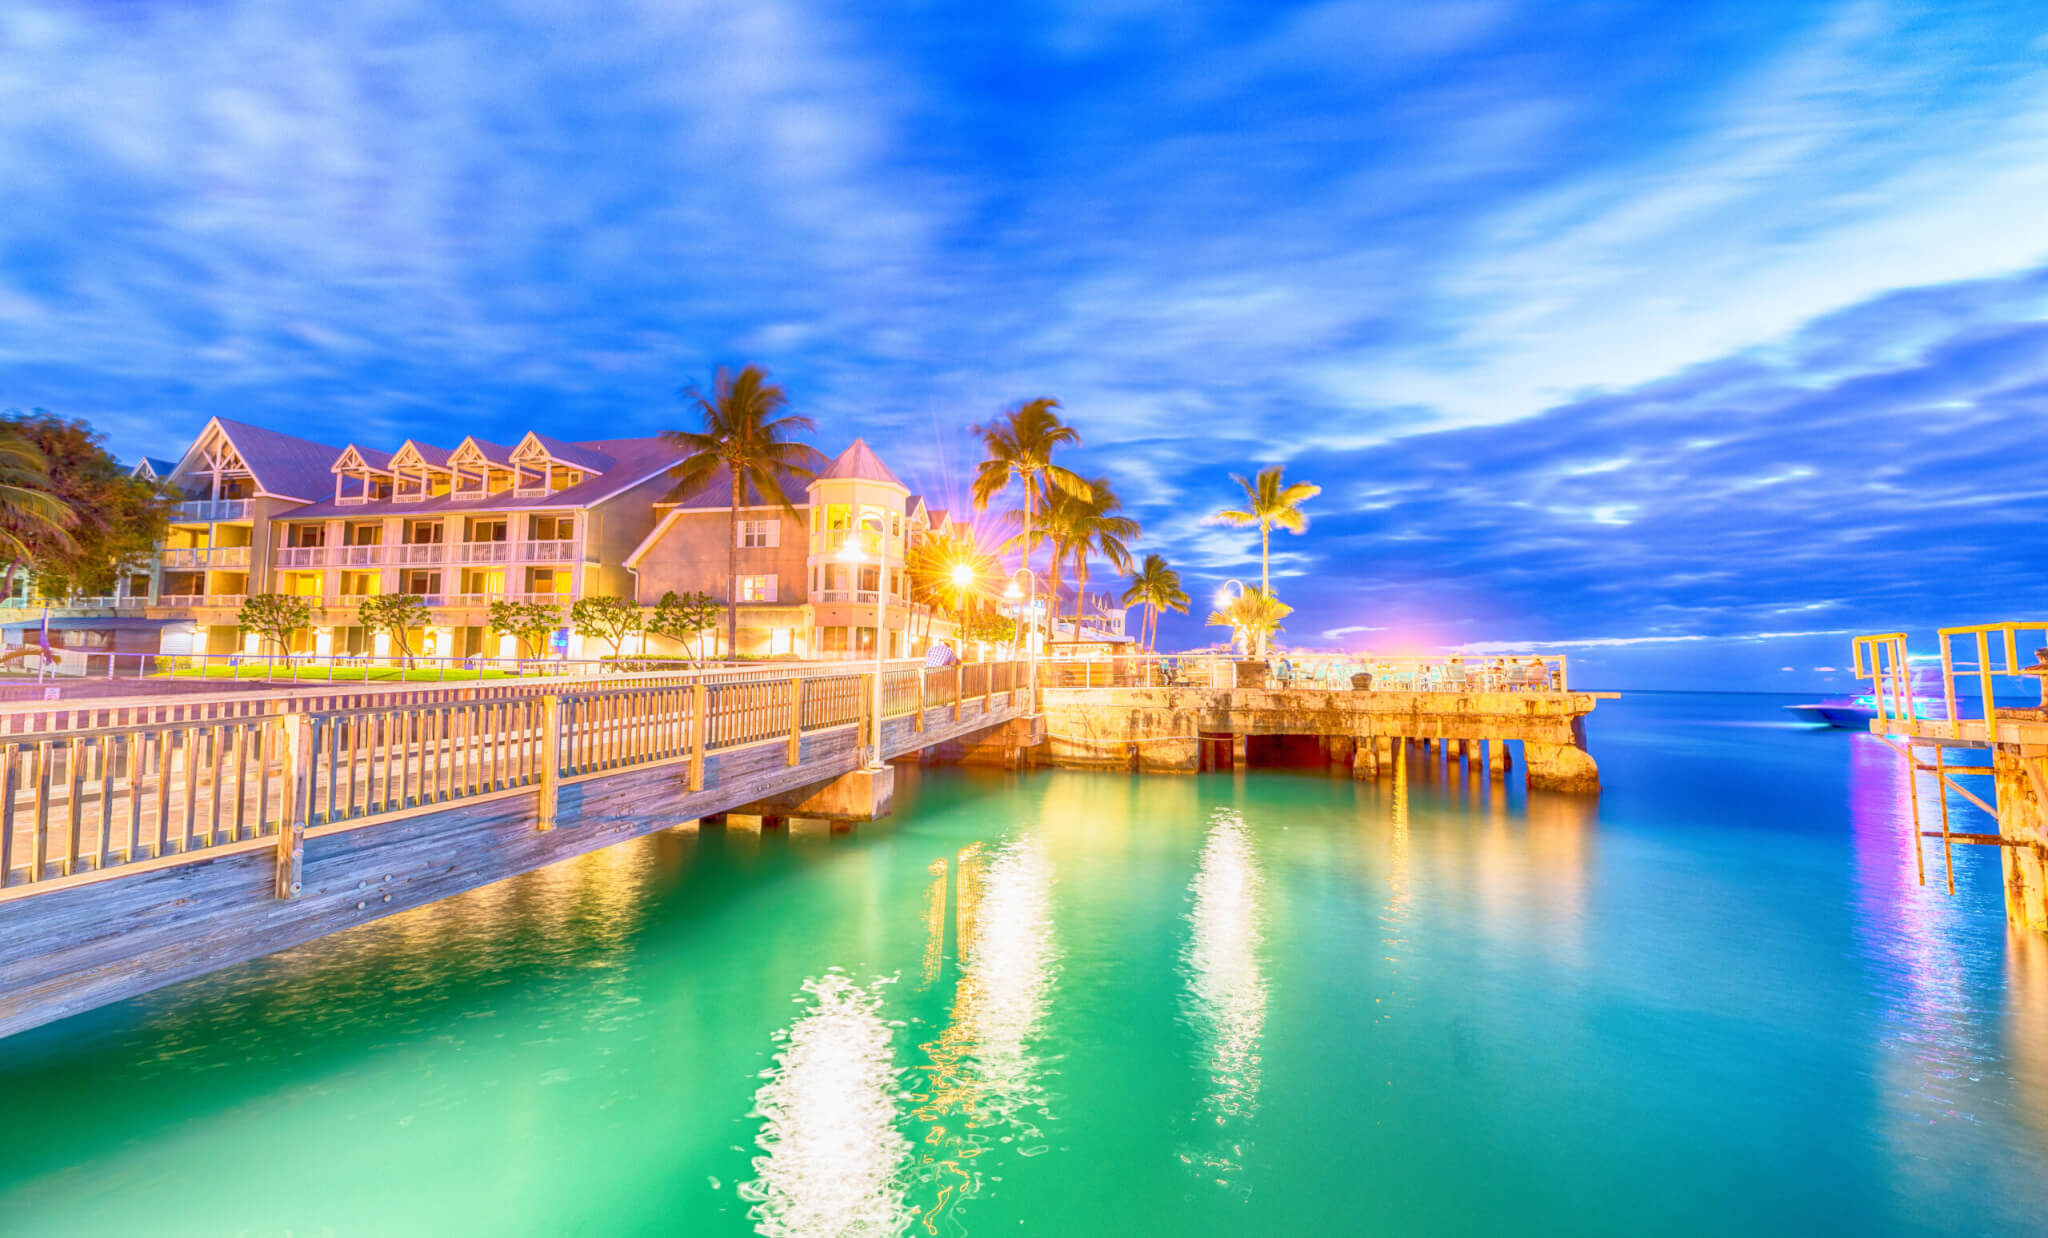 Pier on the port of Key West, Florida at sunset